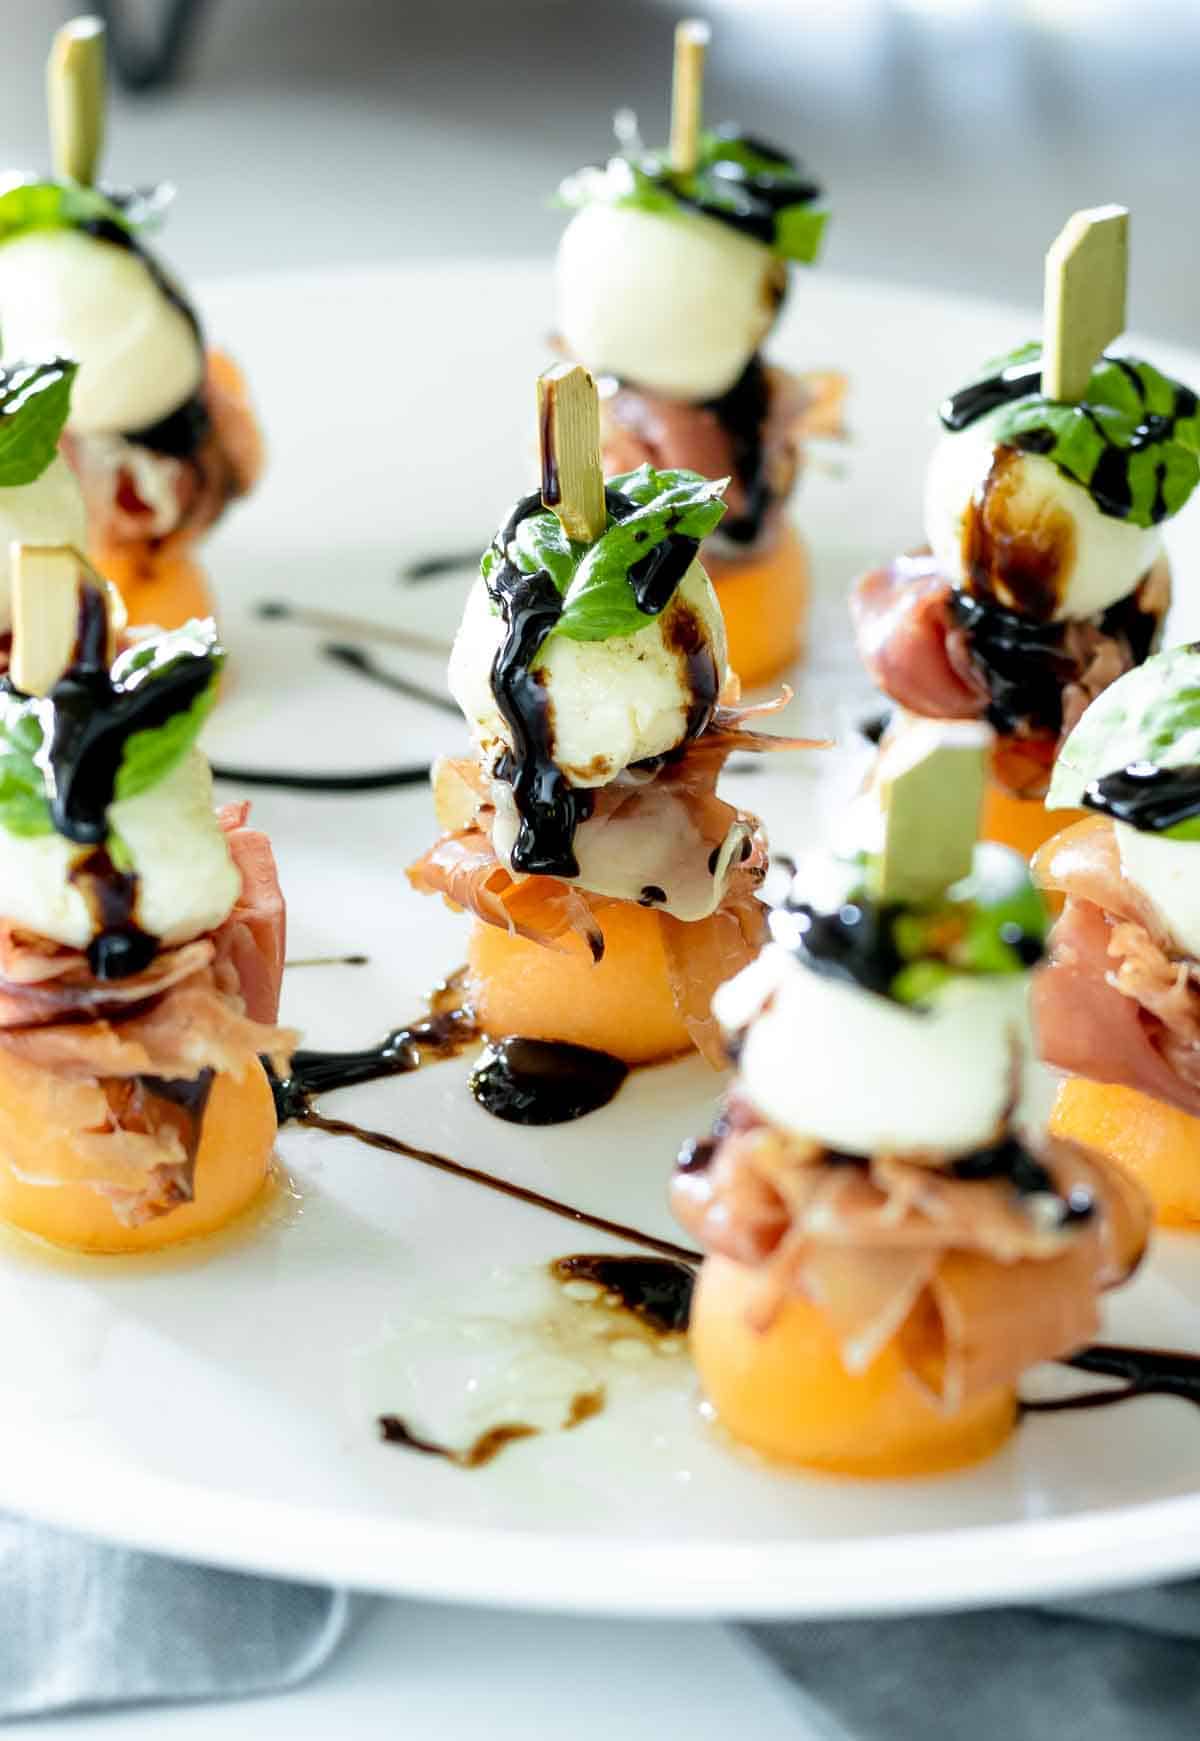 Porsciutto, melon, and mozzarella balls on skewers, covered in balsamic vinegar on a plate.